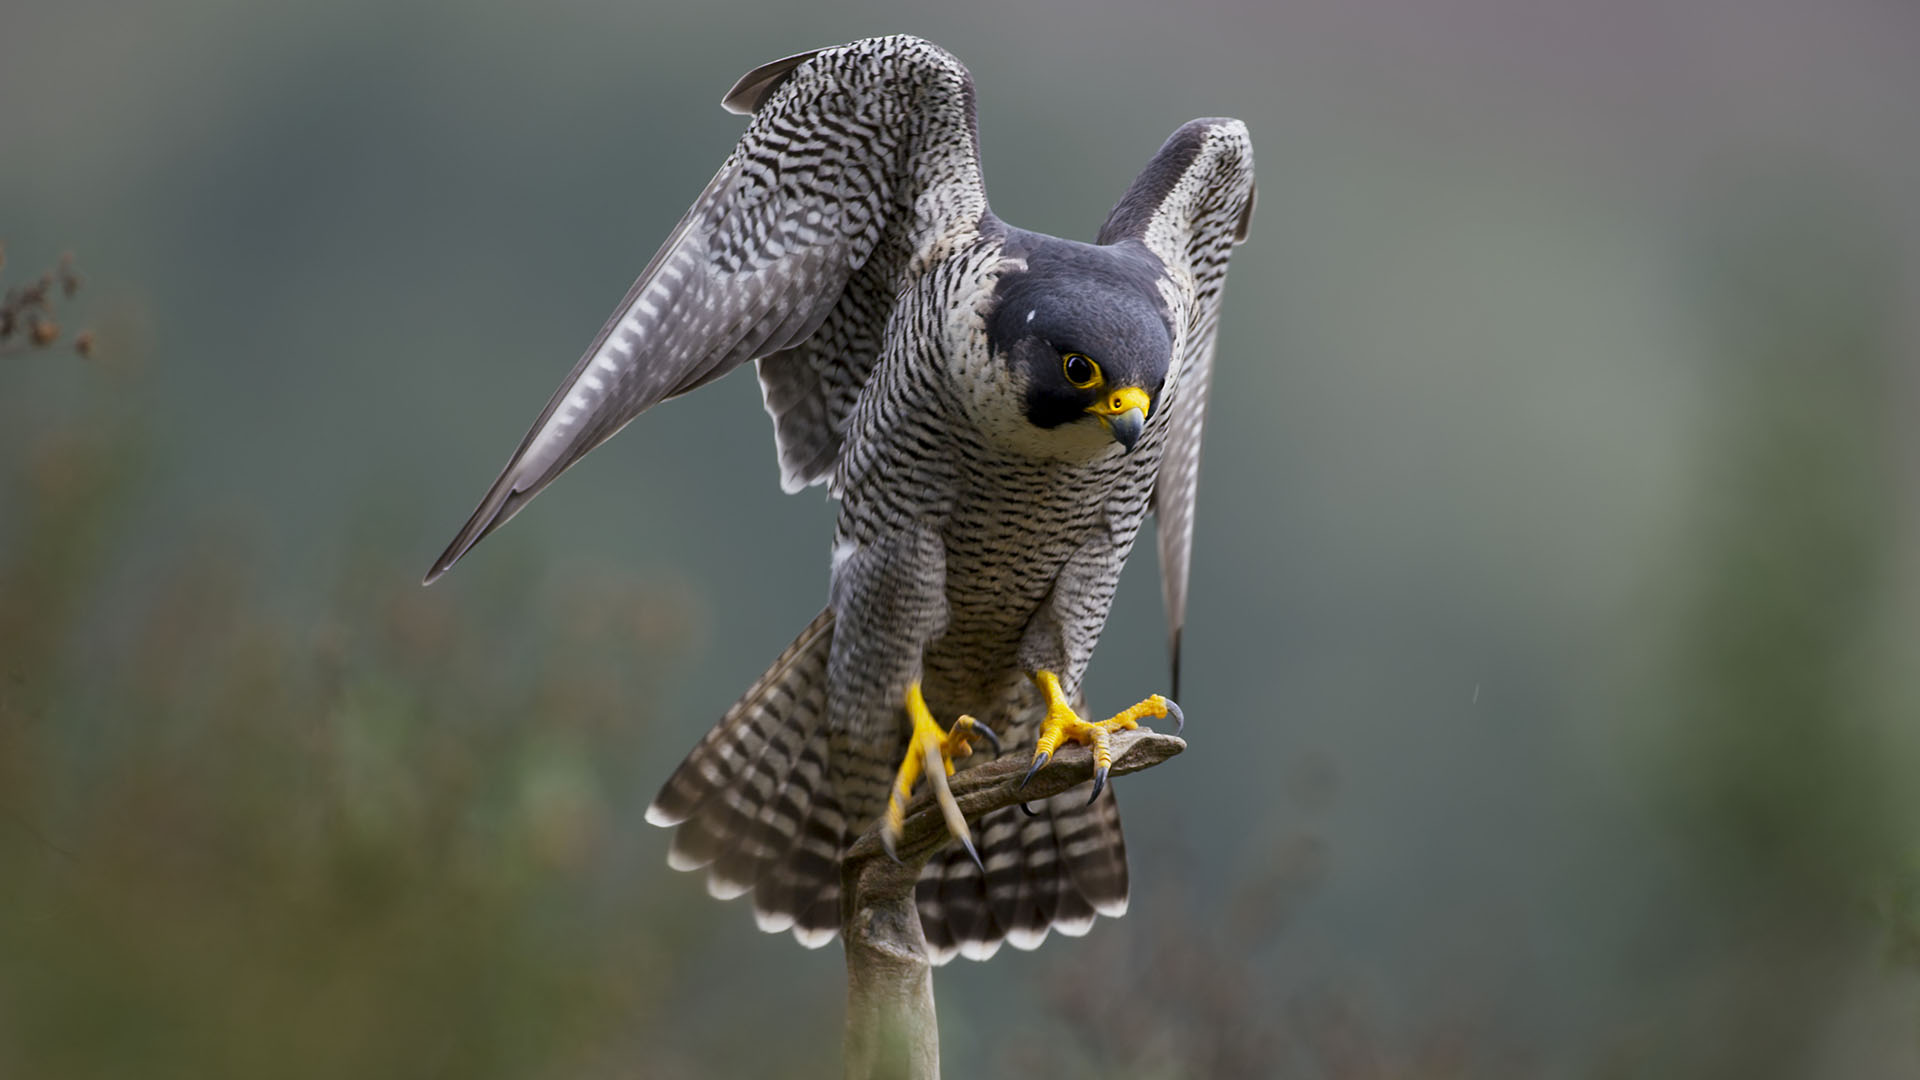 A Peregrine falcon takes flight to catch prey. This is from NATURAL TREASURES. [Photo of the day - December 2022]